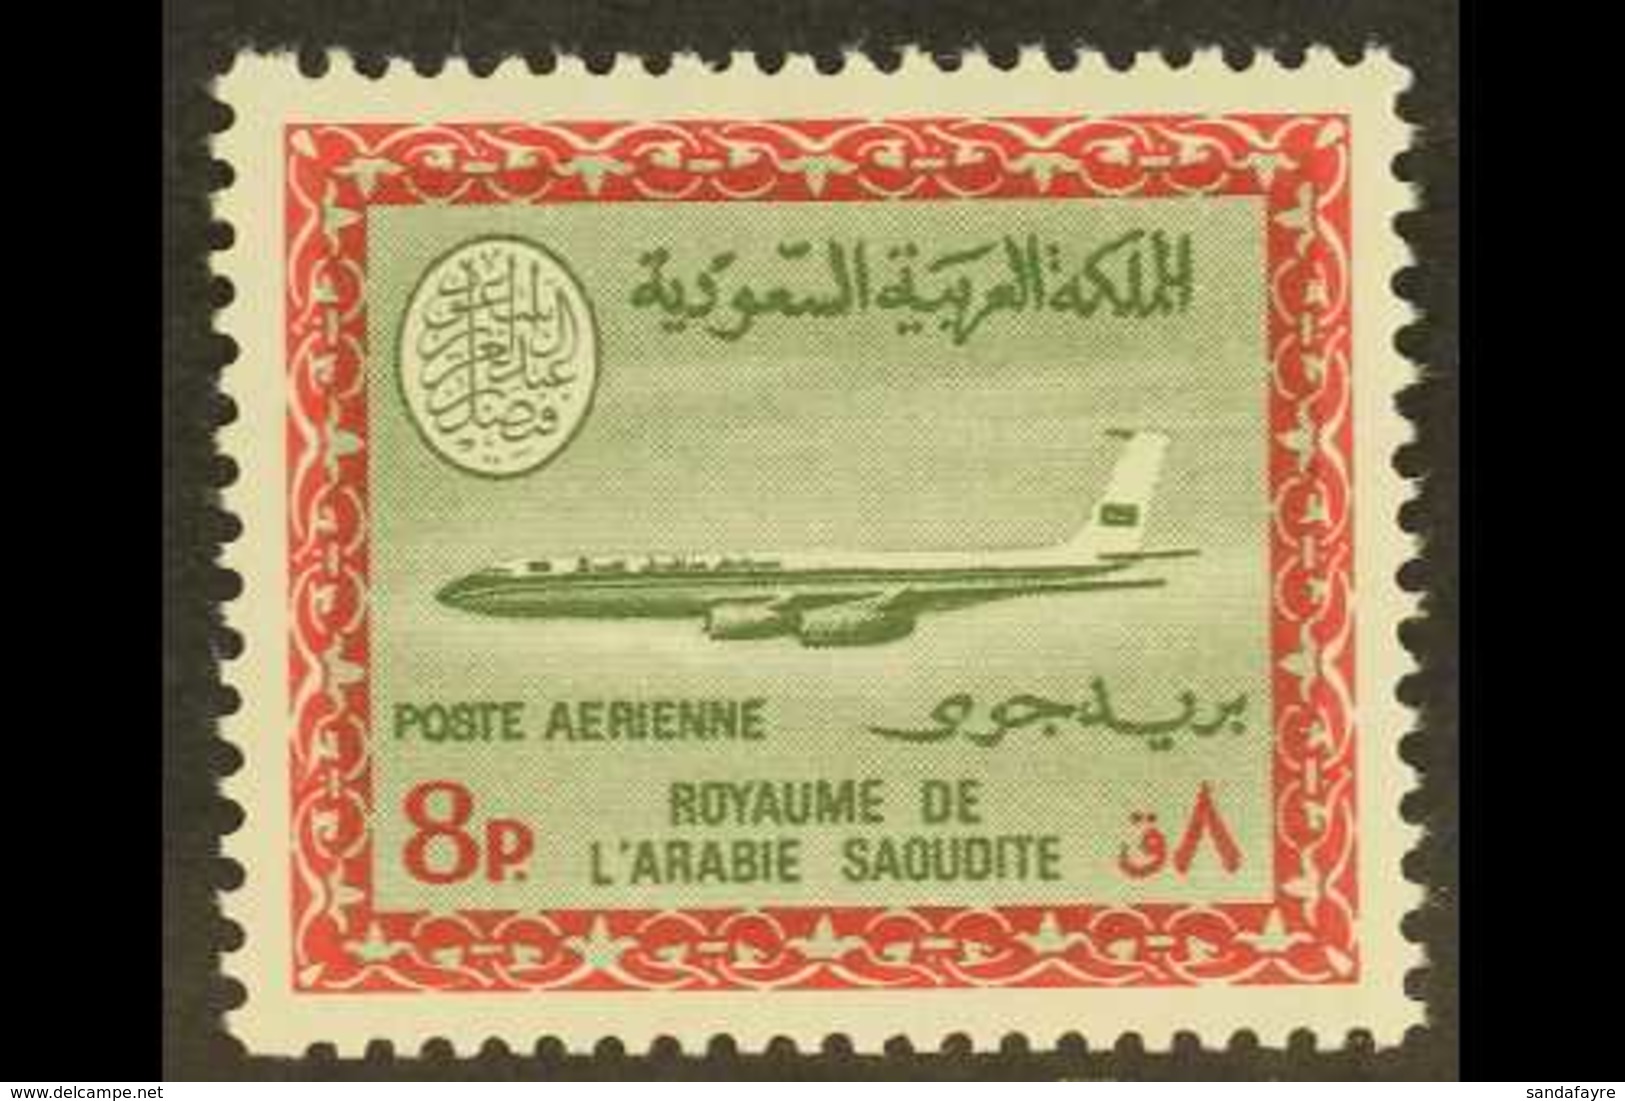 1966-75  8p Olive-green & Carmine Air Aircraft, SG 723, Very Fine Never Hinged Mint, Fresh. For More Images, Please Visi - Arabie Saoudite